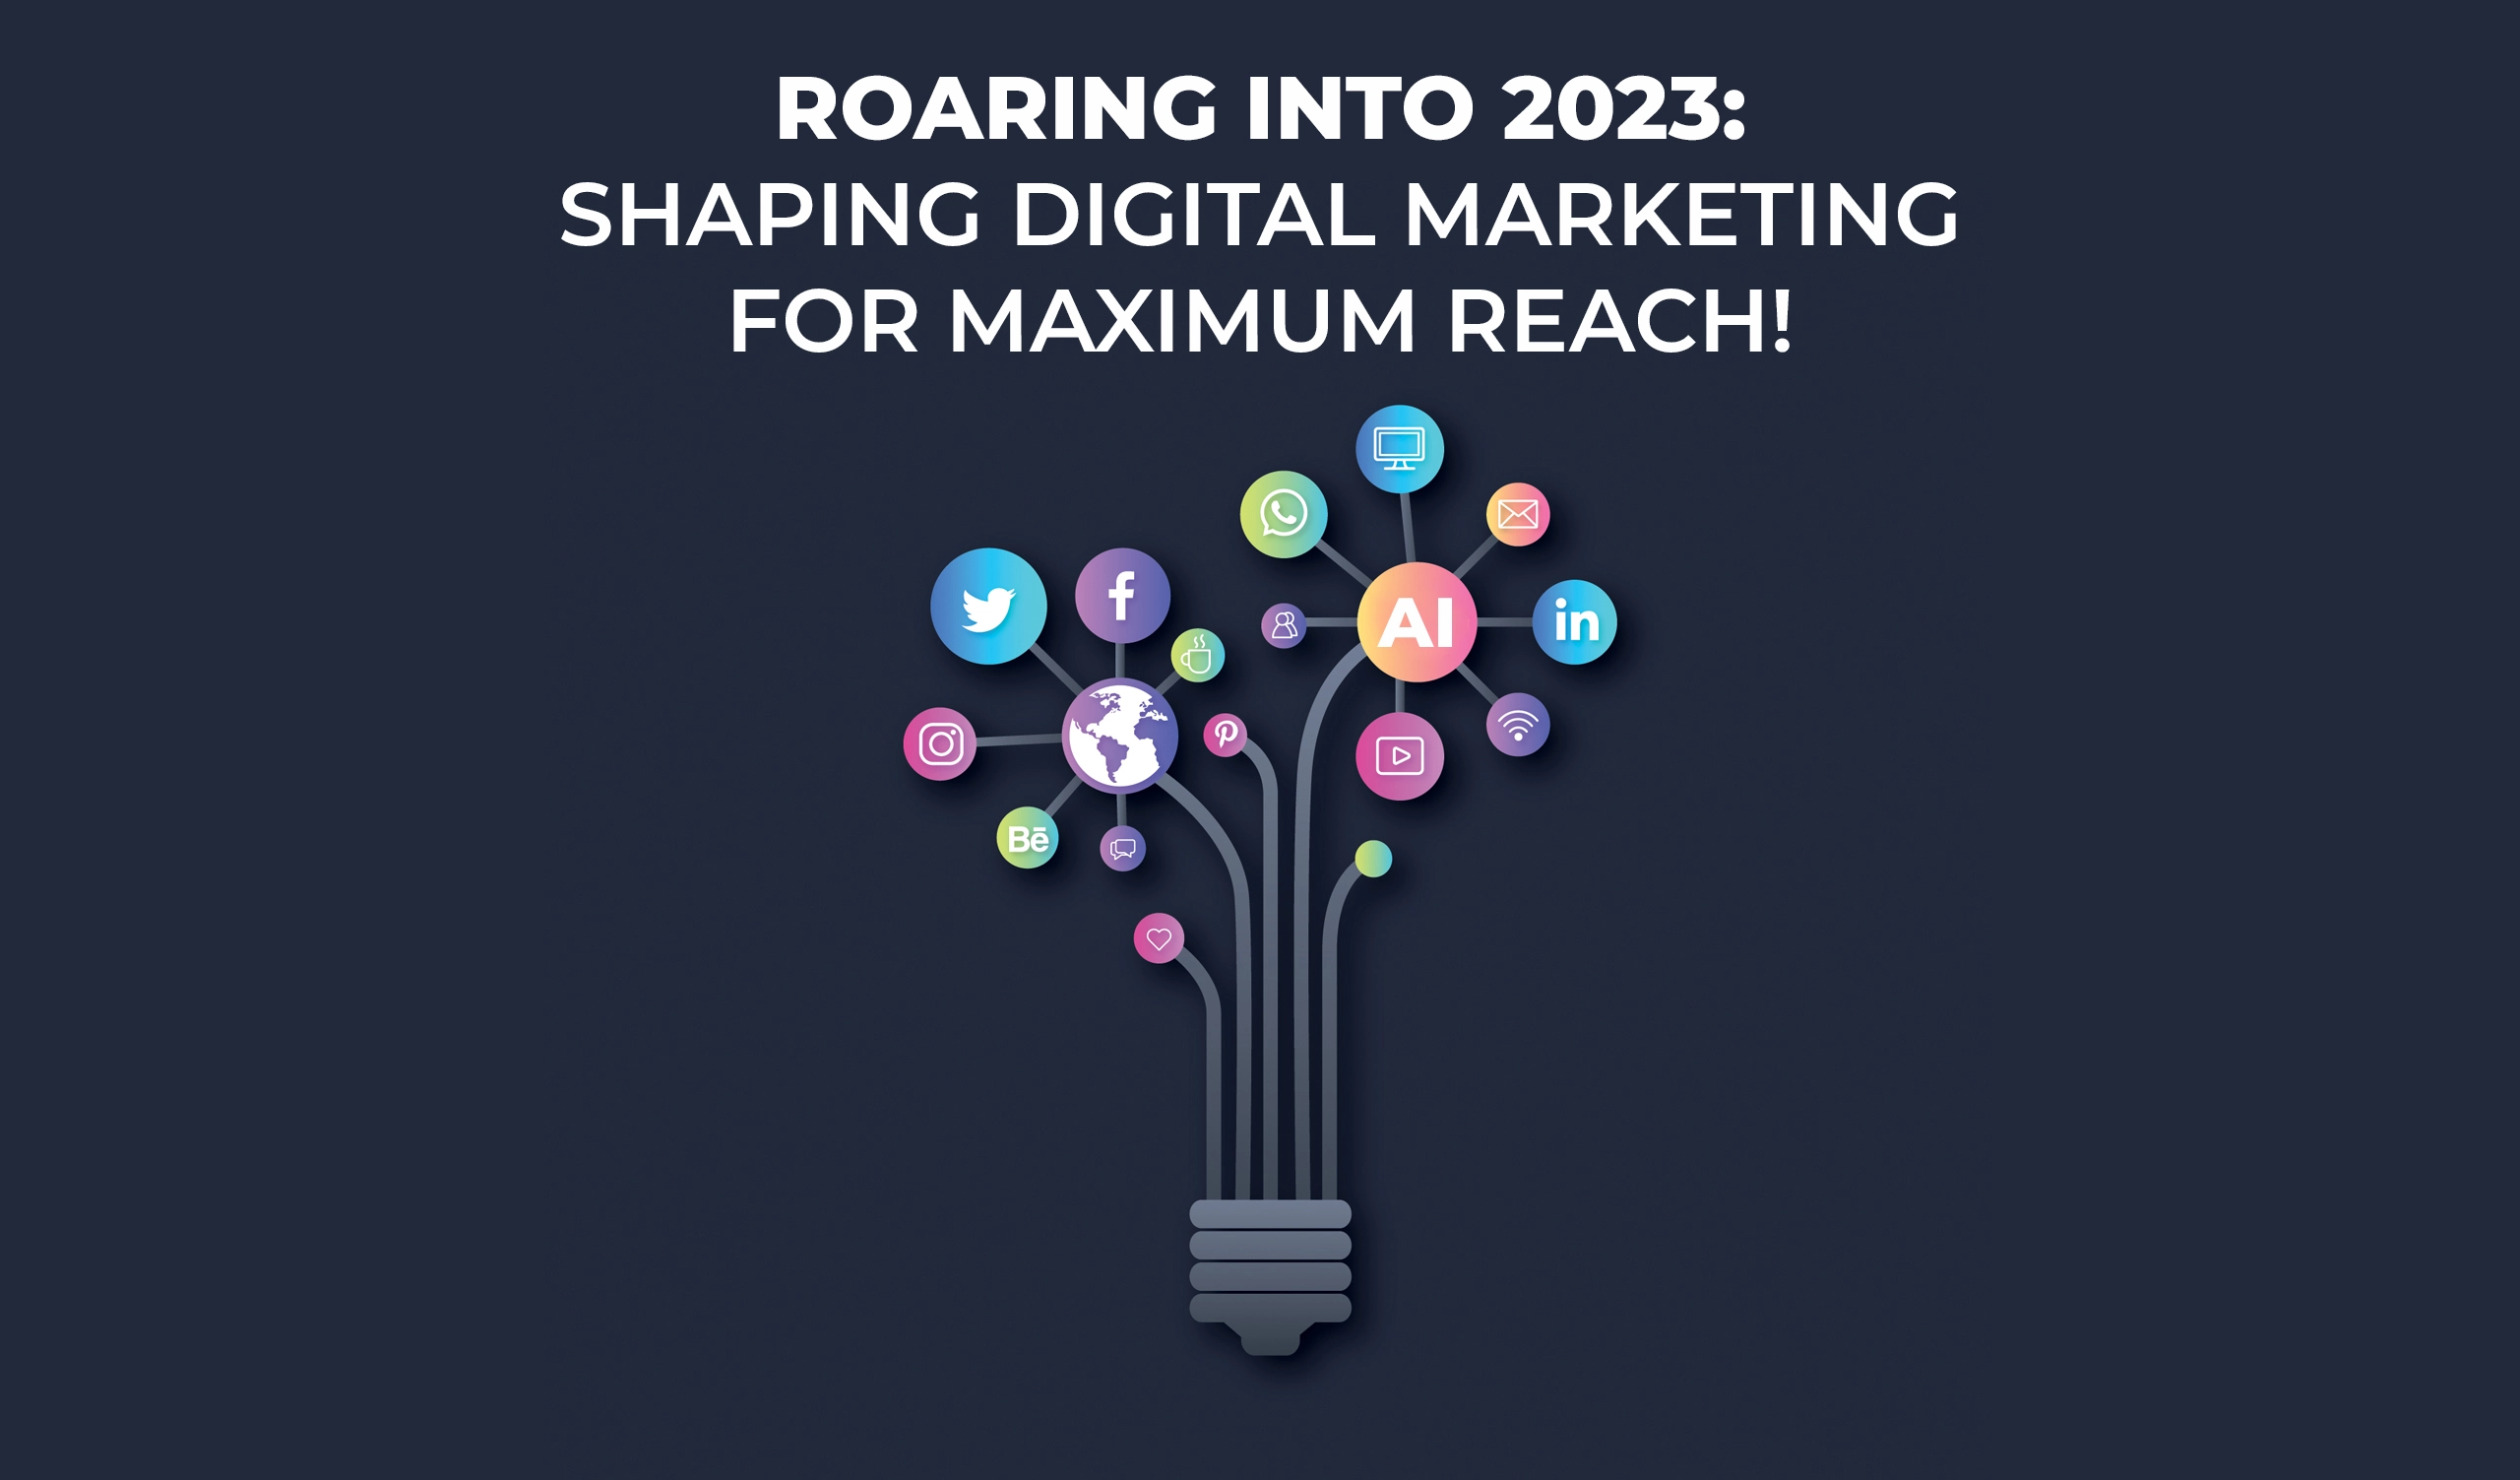 Maximize Your Impact! The Ultimate Guide to Shaping Digital Marketing in 2023